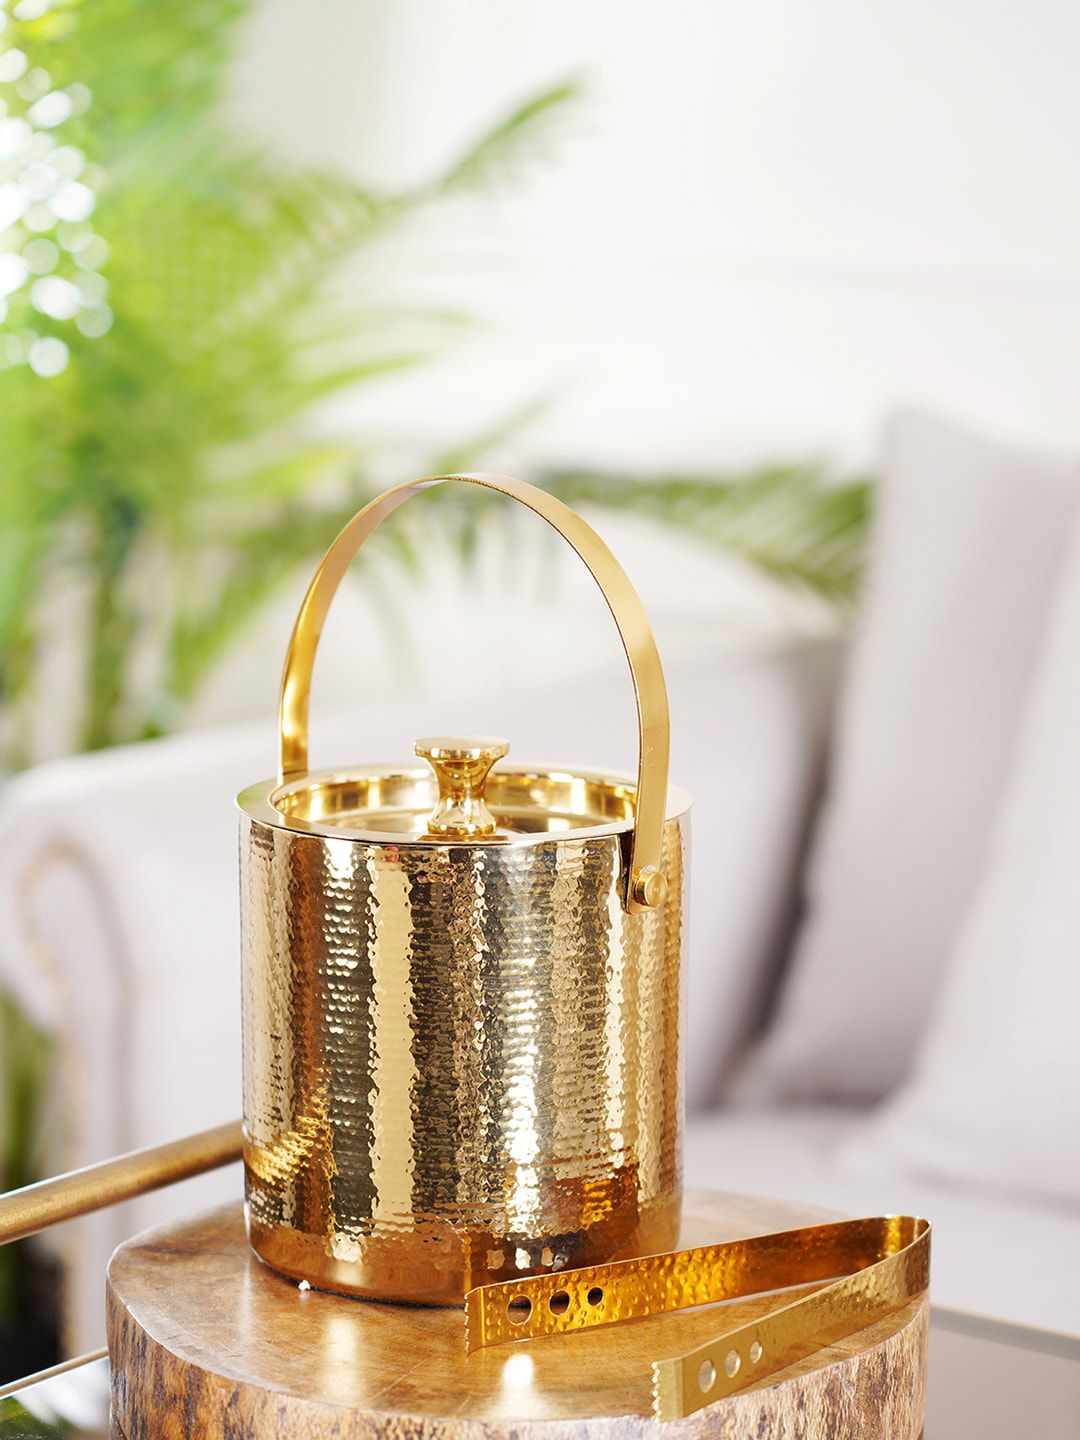 Pure Home and Living Gold-Toned Steel Hammered Ice Bucket With Tongs Price in India